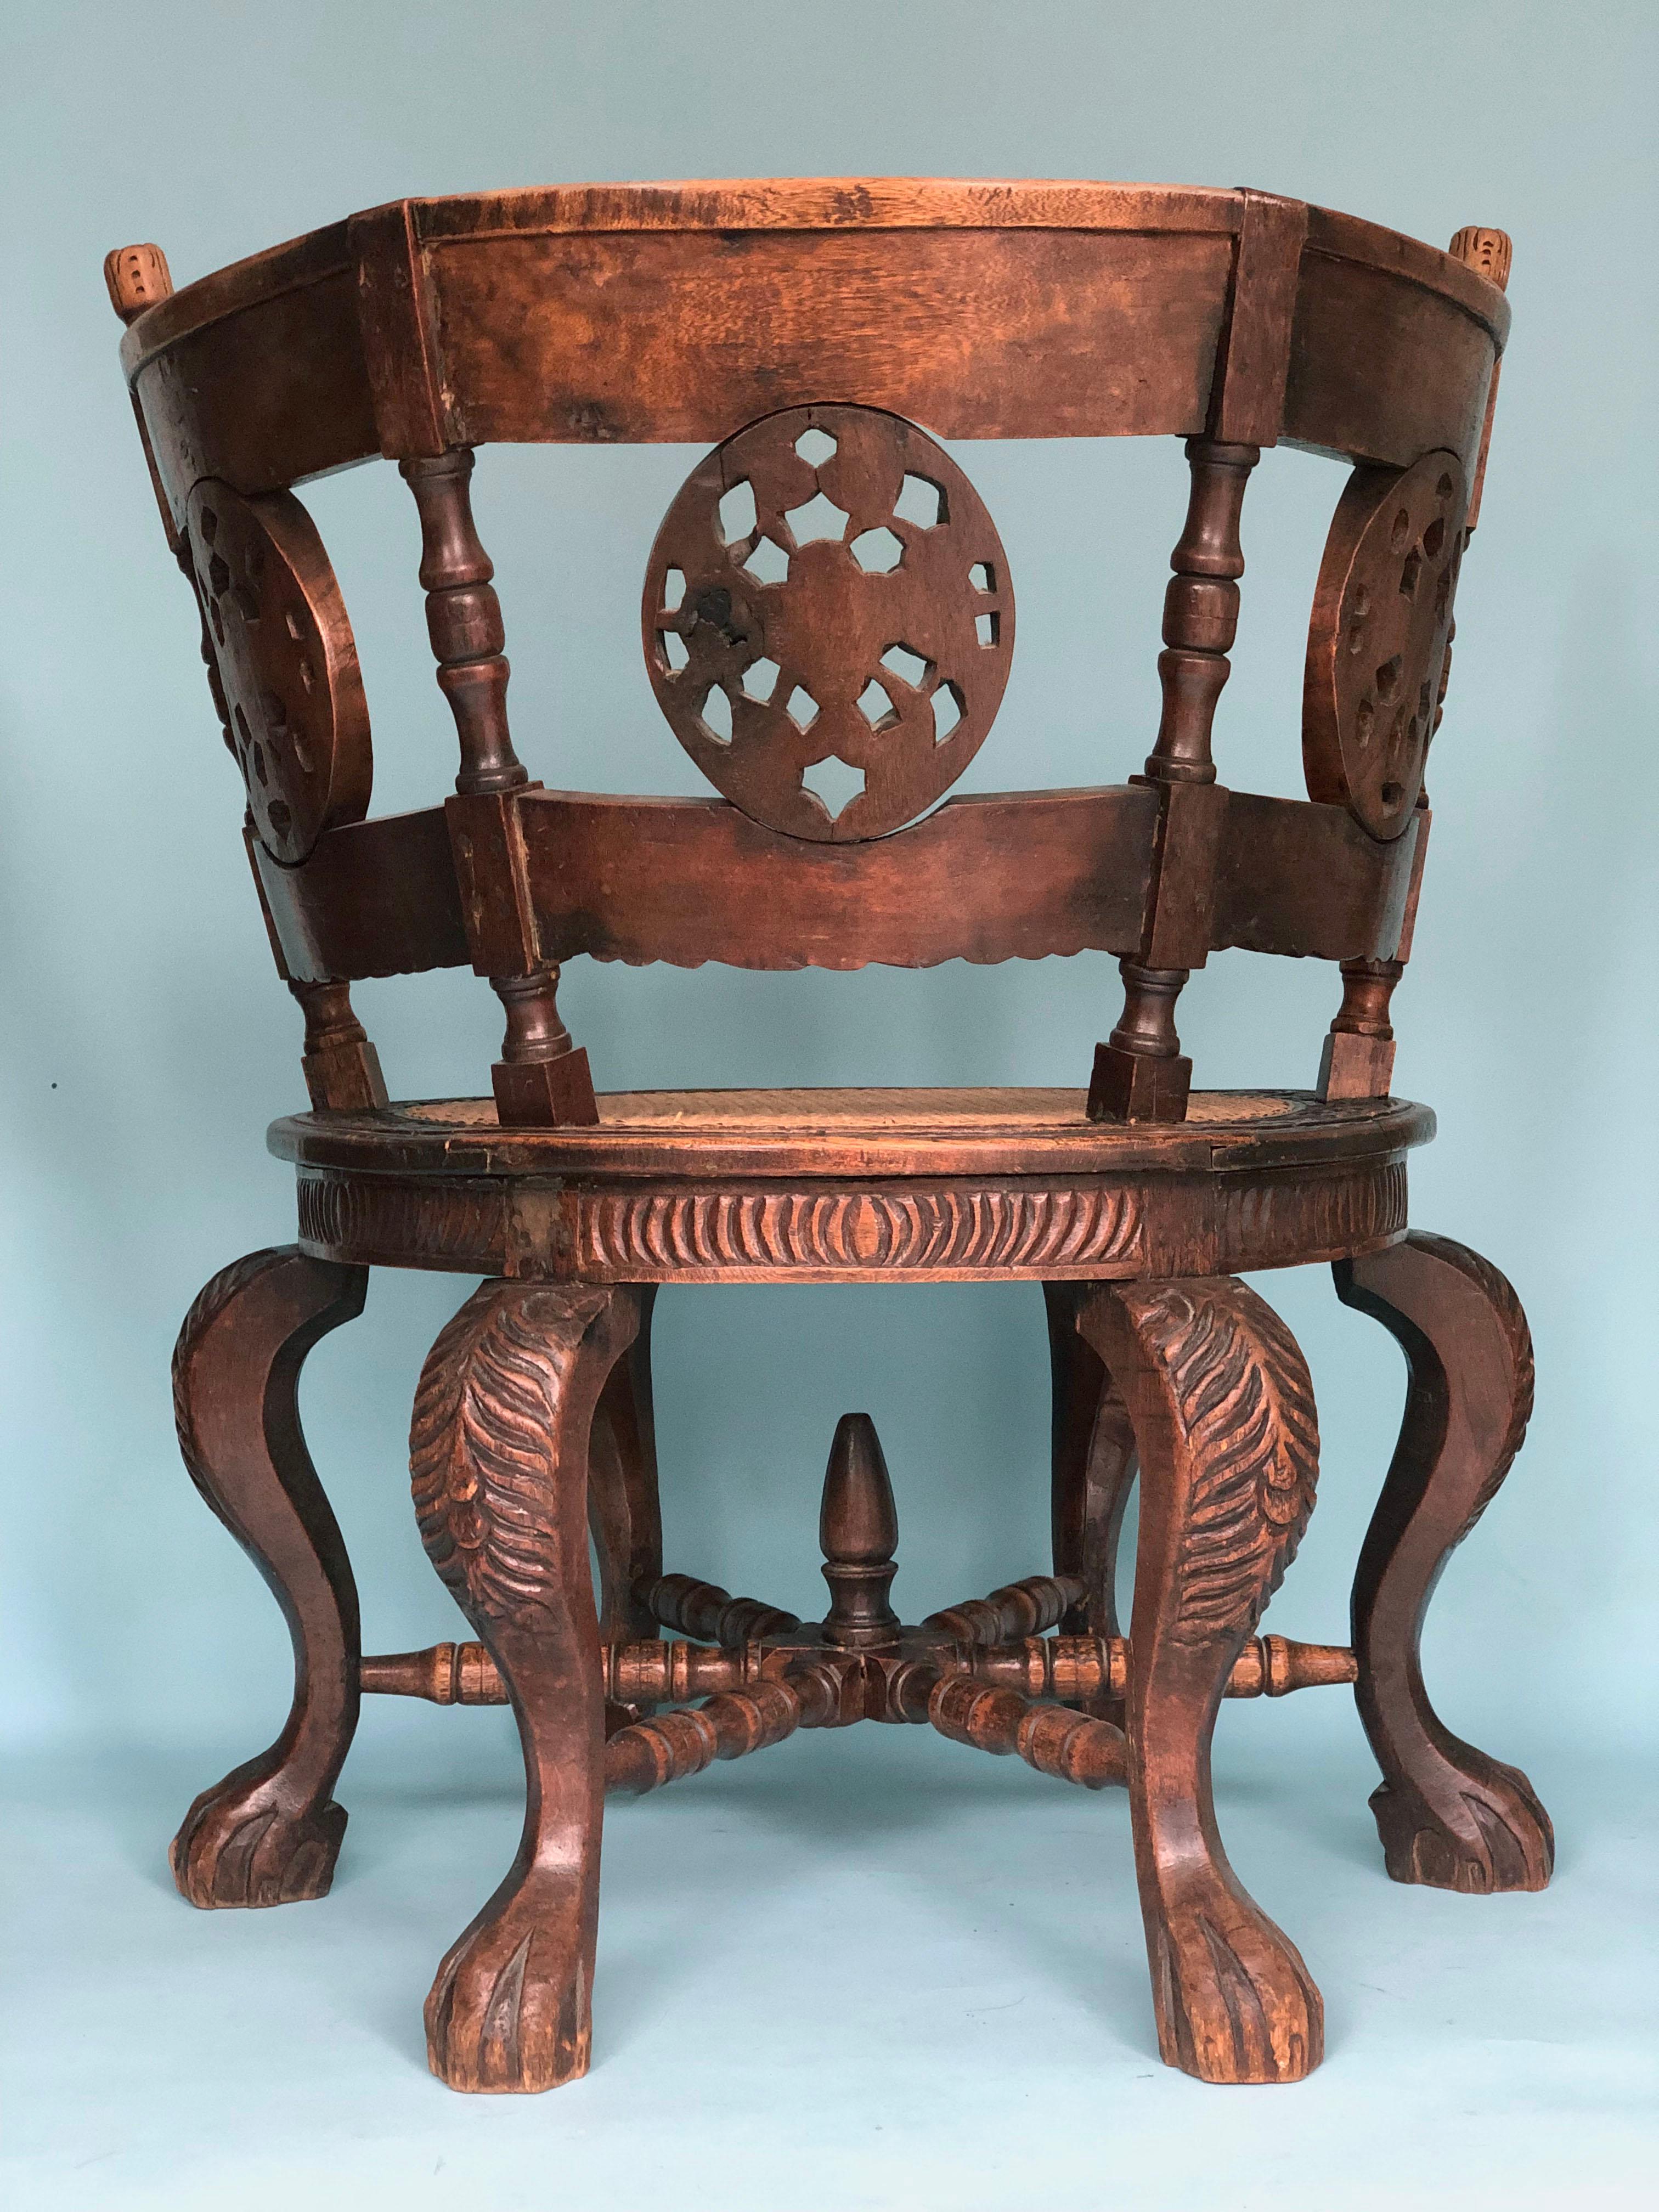 This beautiful Burgomaster colonial chair is raised on six cabriole legs with lion-paw feet, and has a semi-circular back decorated with carved medallions and flowers. This type of furniture was developed in the late 17th century in the former Dutch